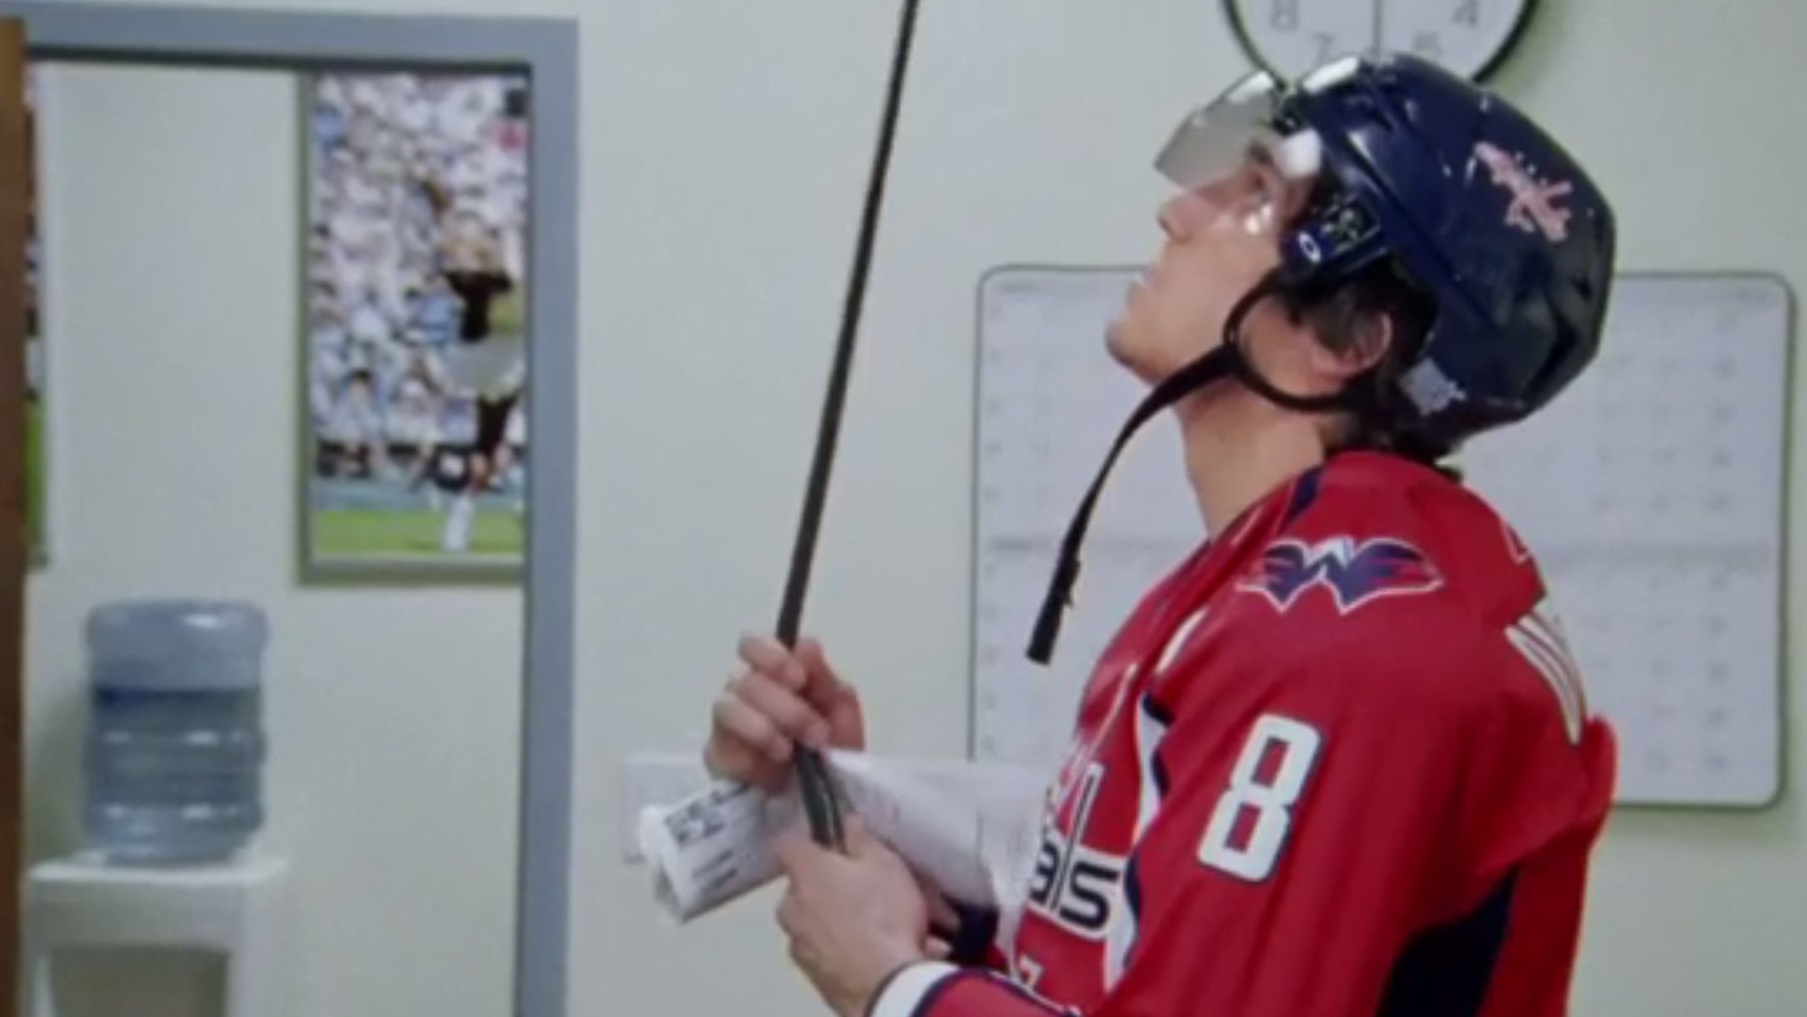 This Is SportsCenter: Alex Ovechkin